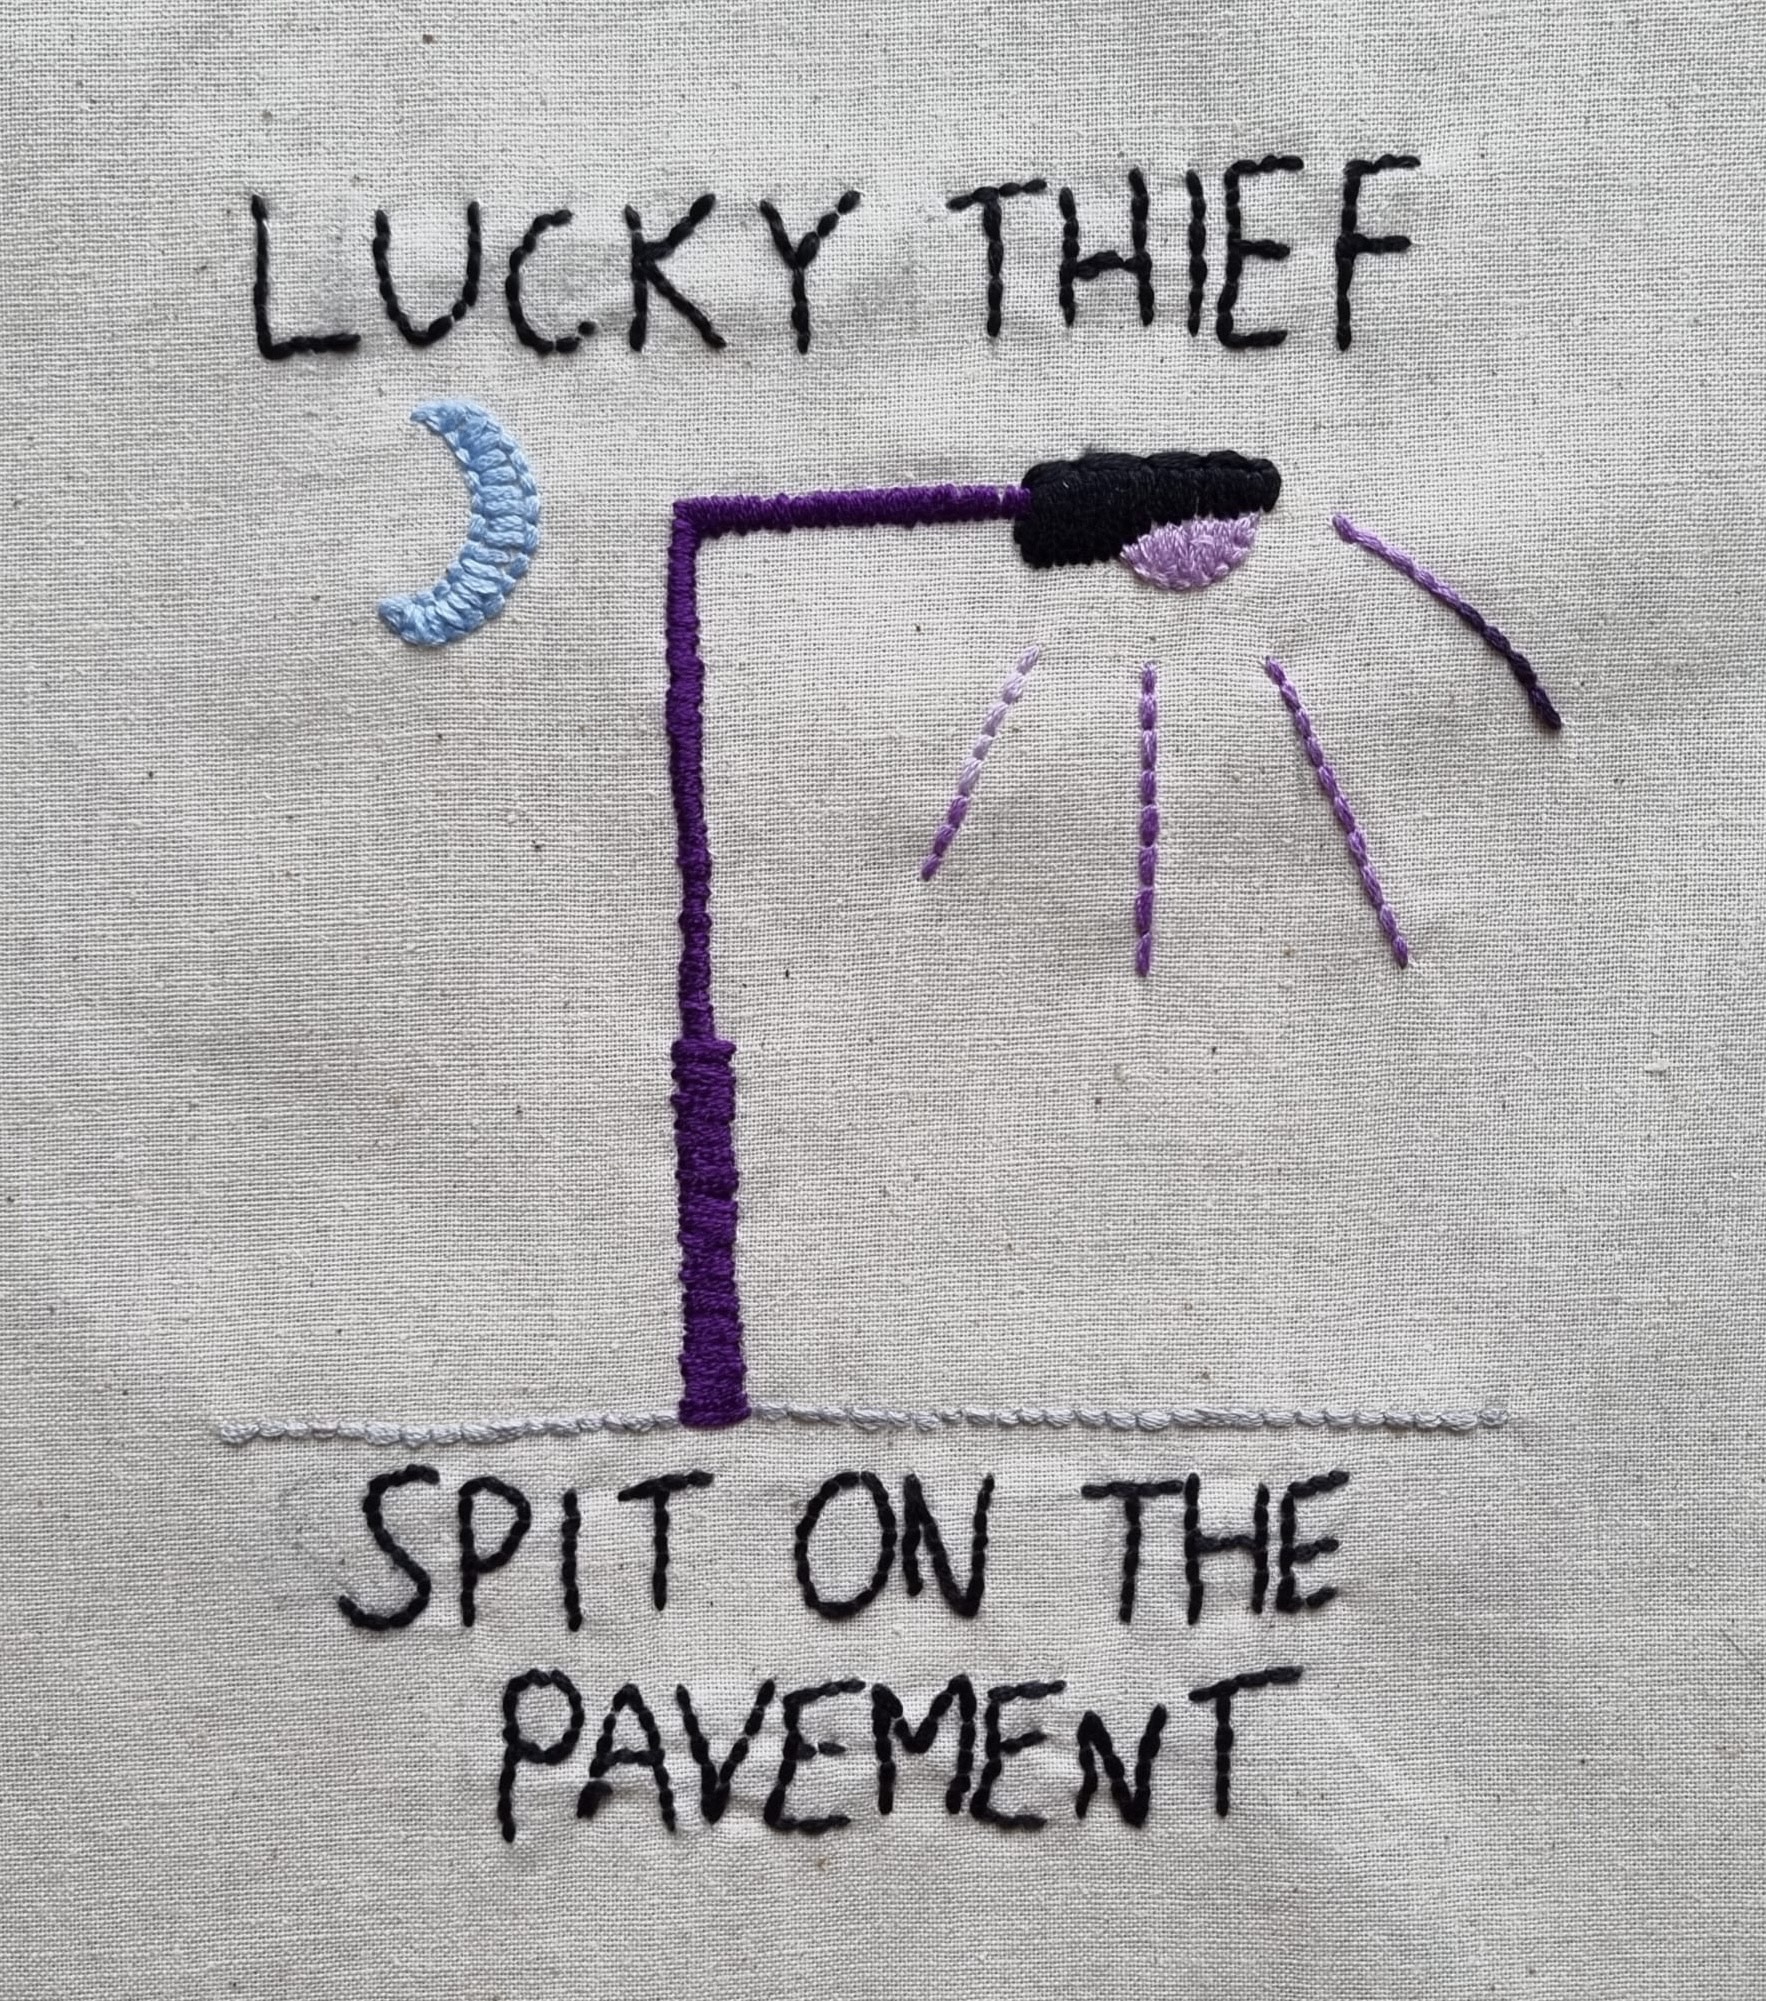 HOT TRACK: “Spit on the Pavement” by LuckyThief